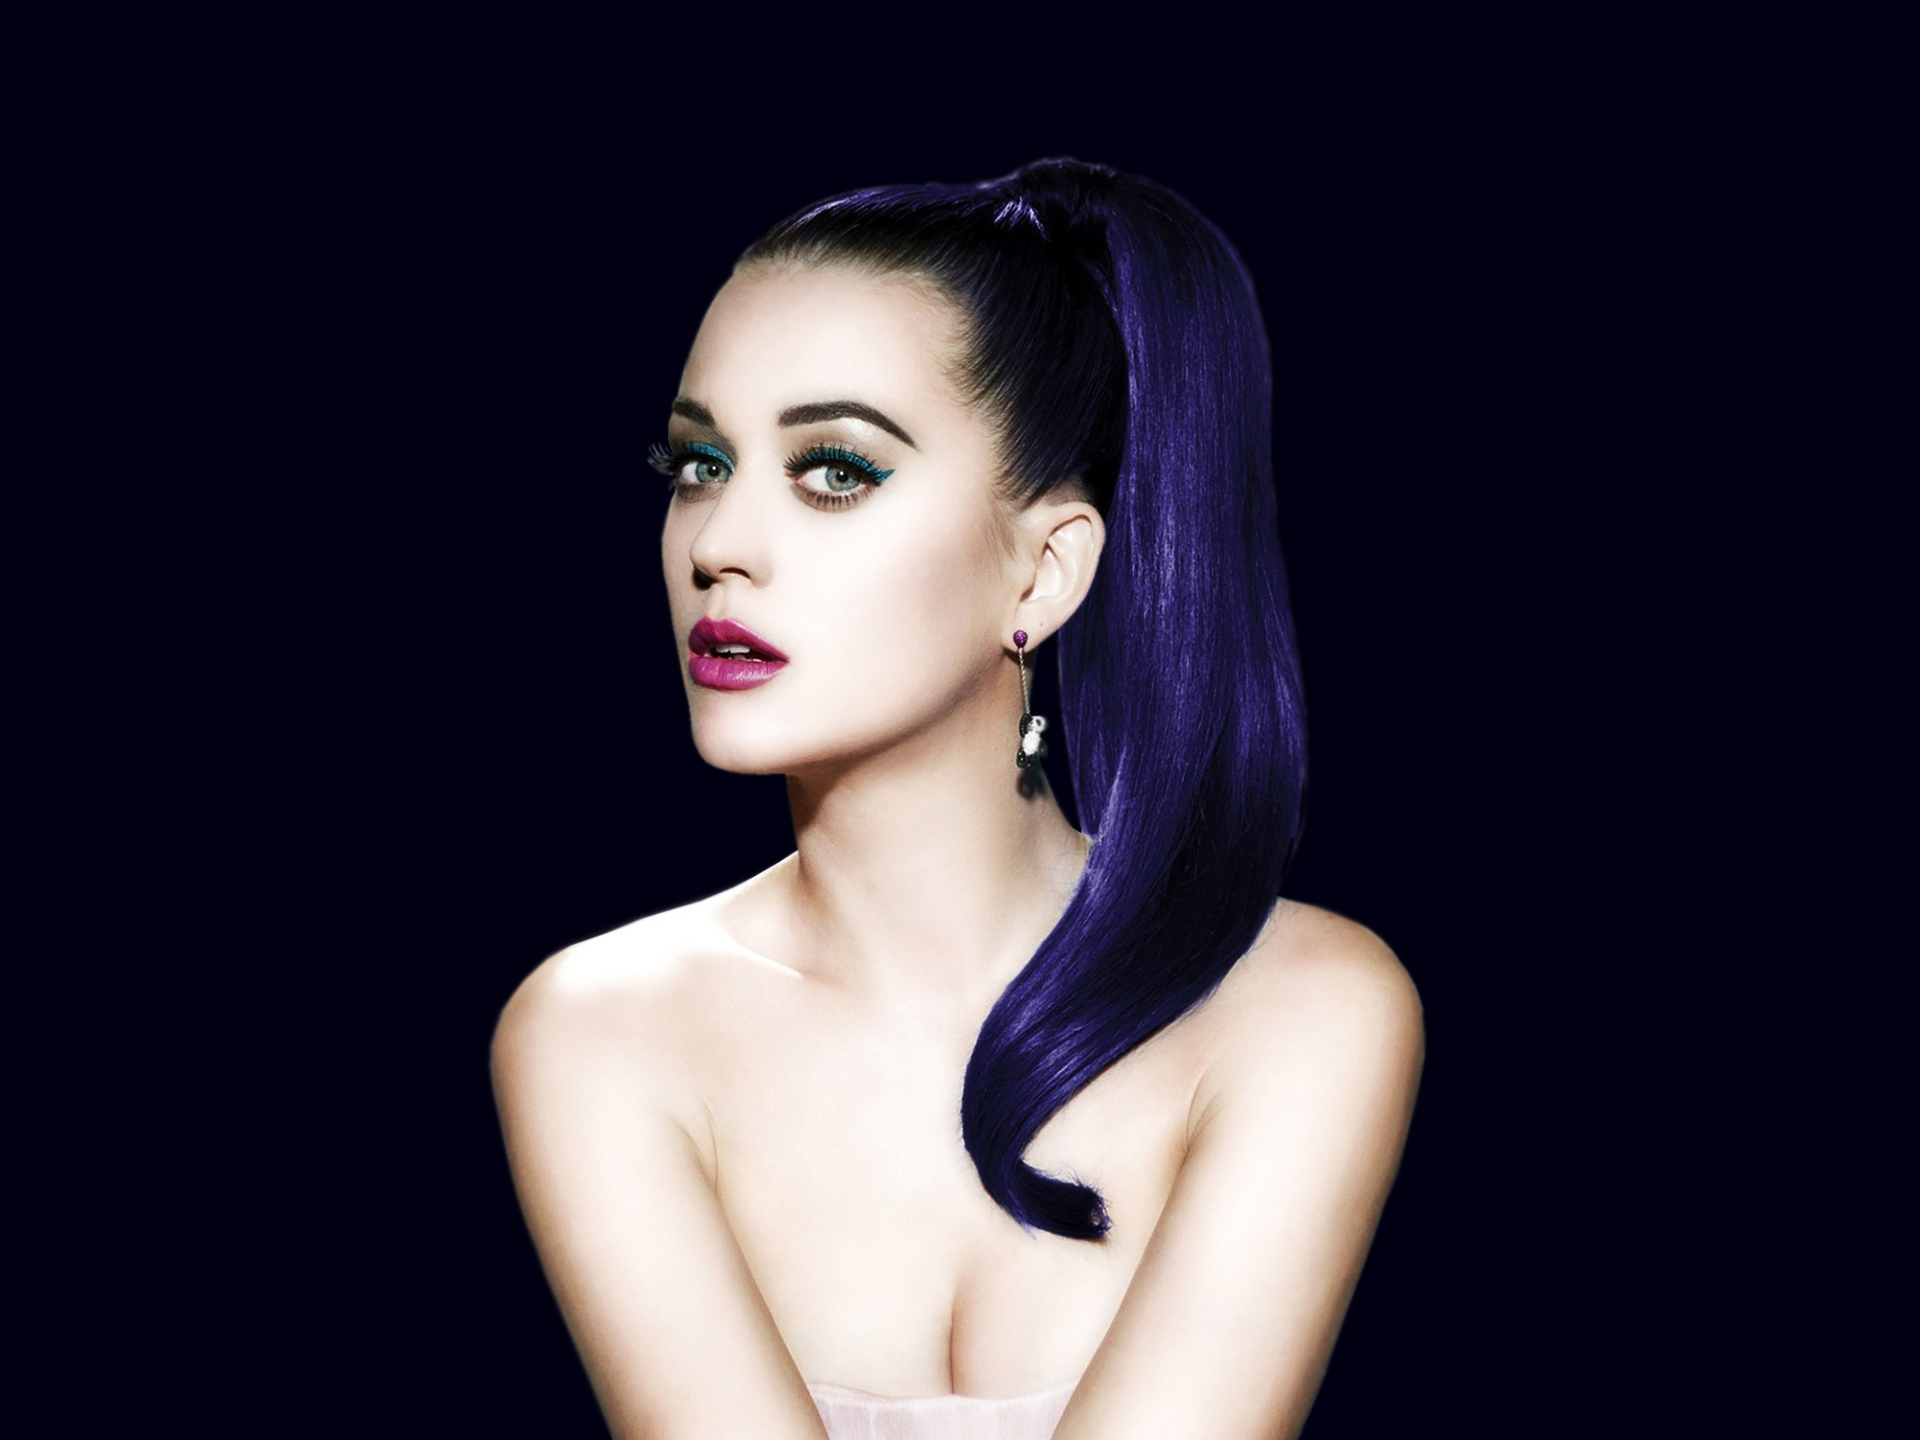 Katy Perry Wallpaper High Quality